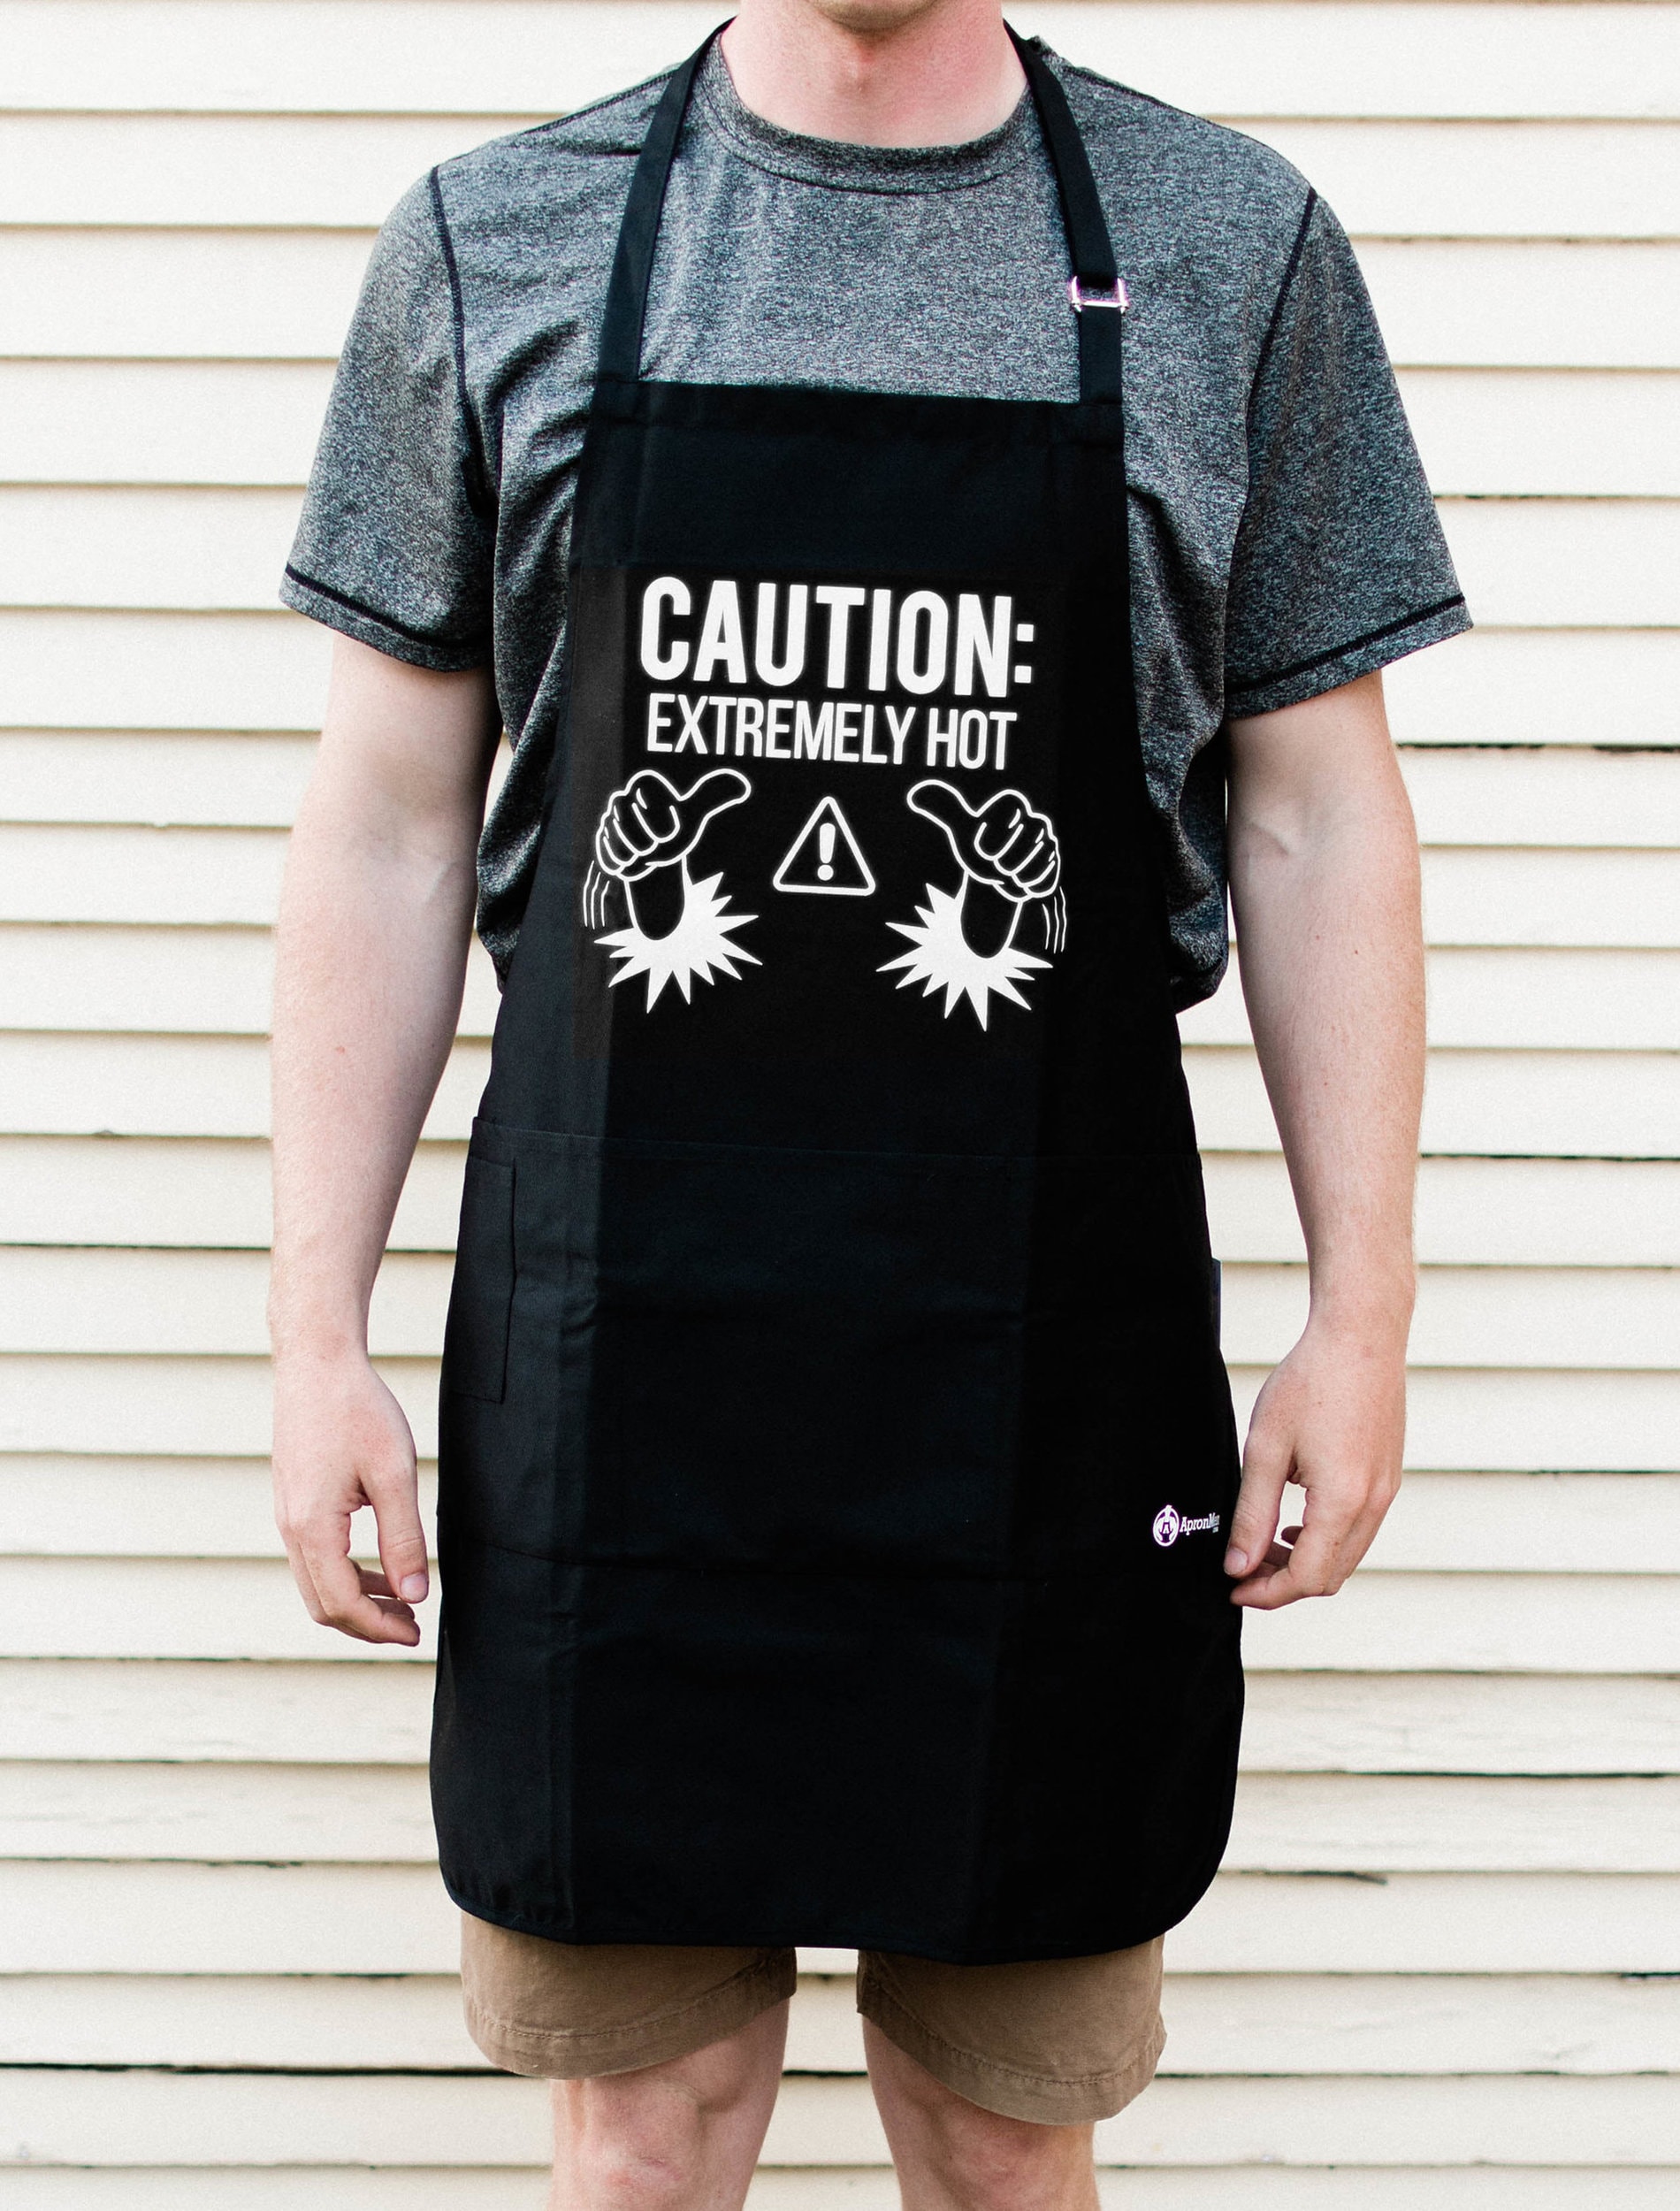 Black-Insulated Grilling Apron Beer Pocket Novelty Apron King of the Grill 